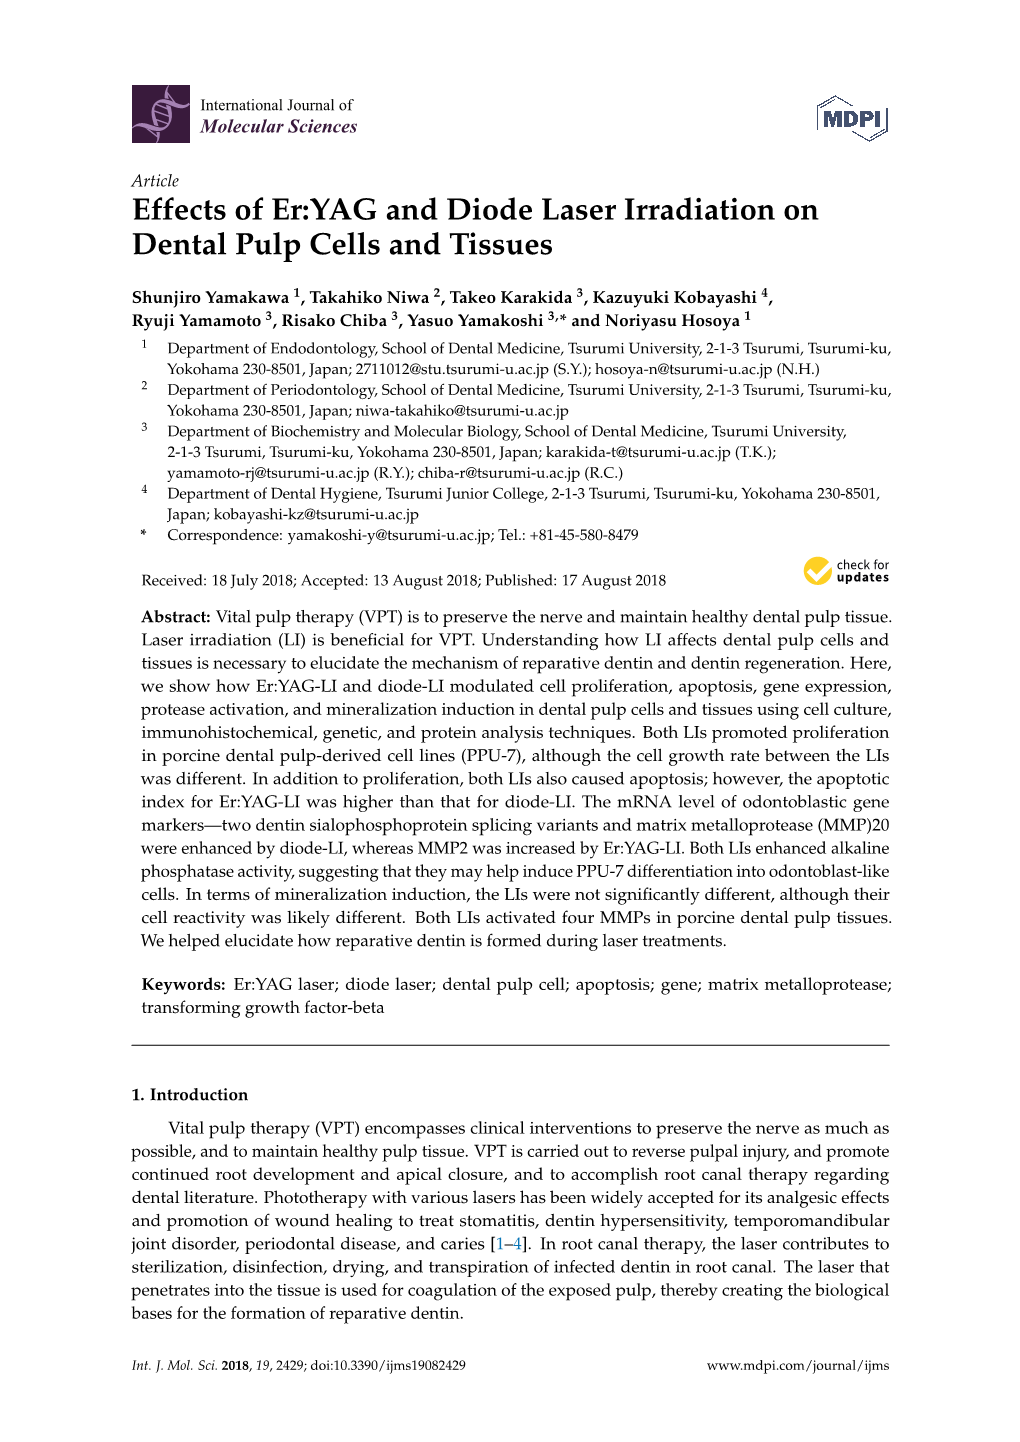 Effects of Er:YAG and Diode Laser Irradiation on Dental Pulp Cells and Tissues